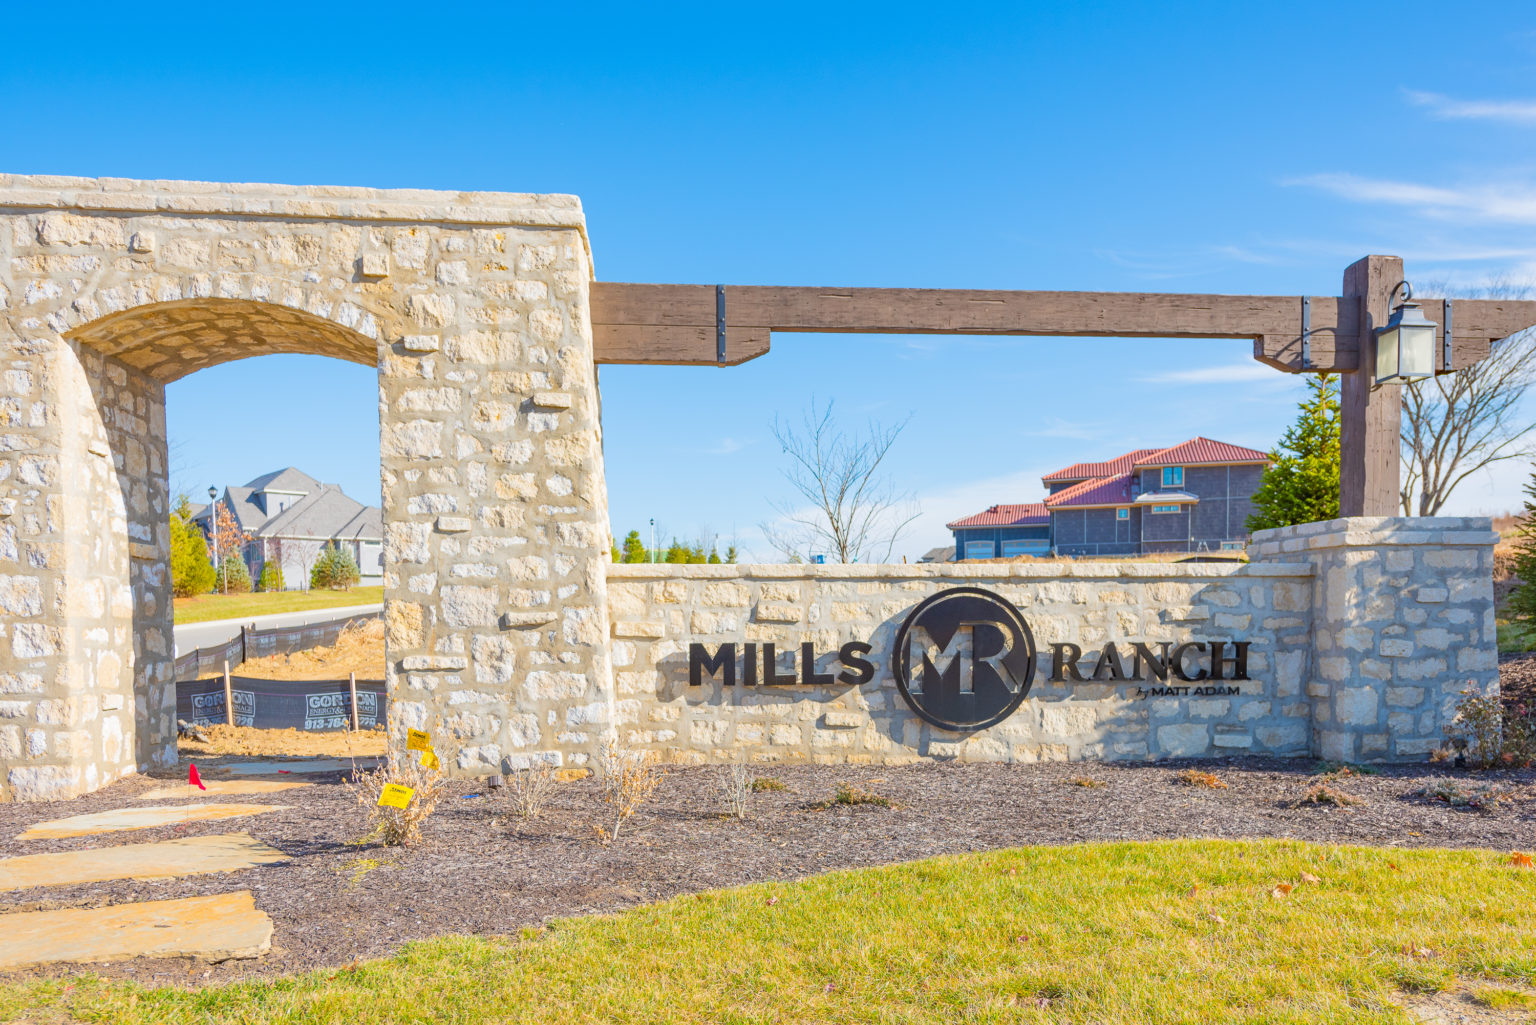 Mills Ranch homes for sale Overland Park KS - Johnson County Home Report homes for sale overland park mo